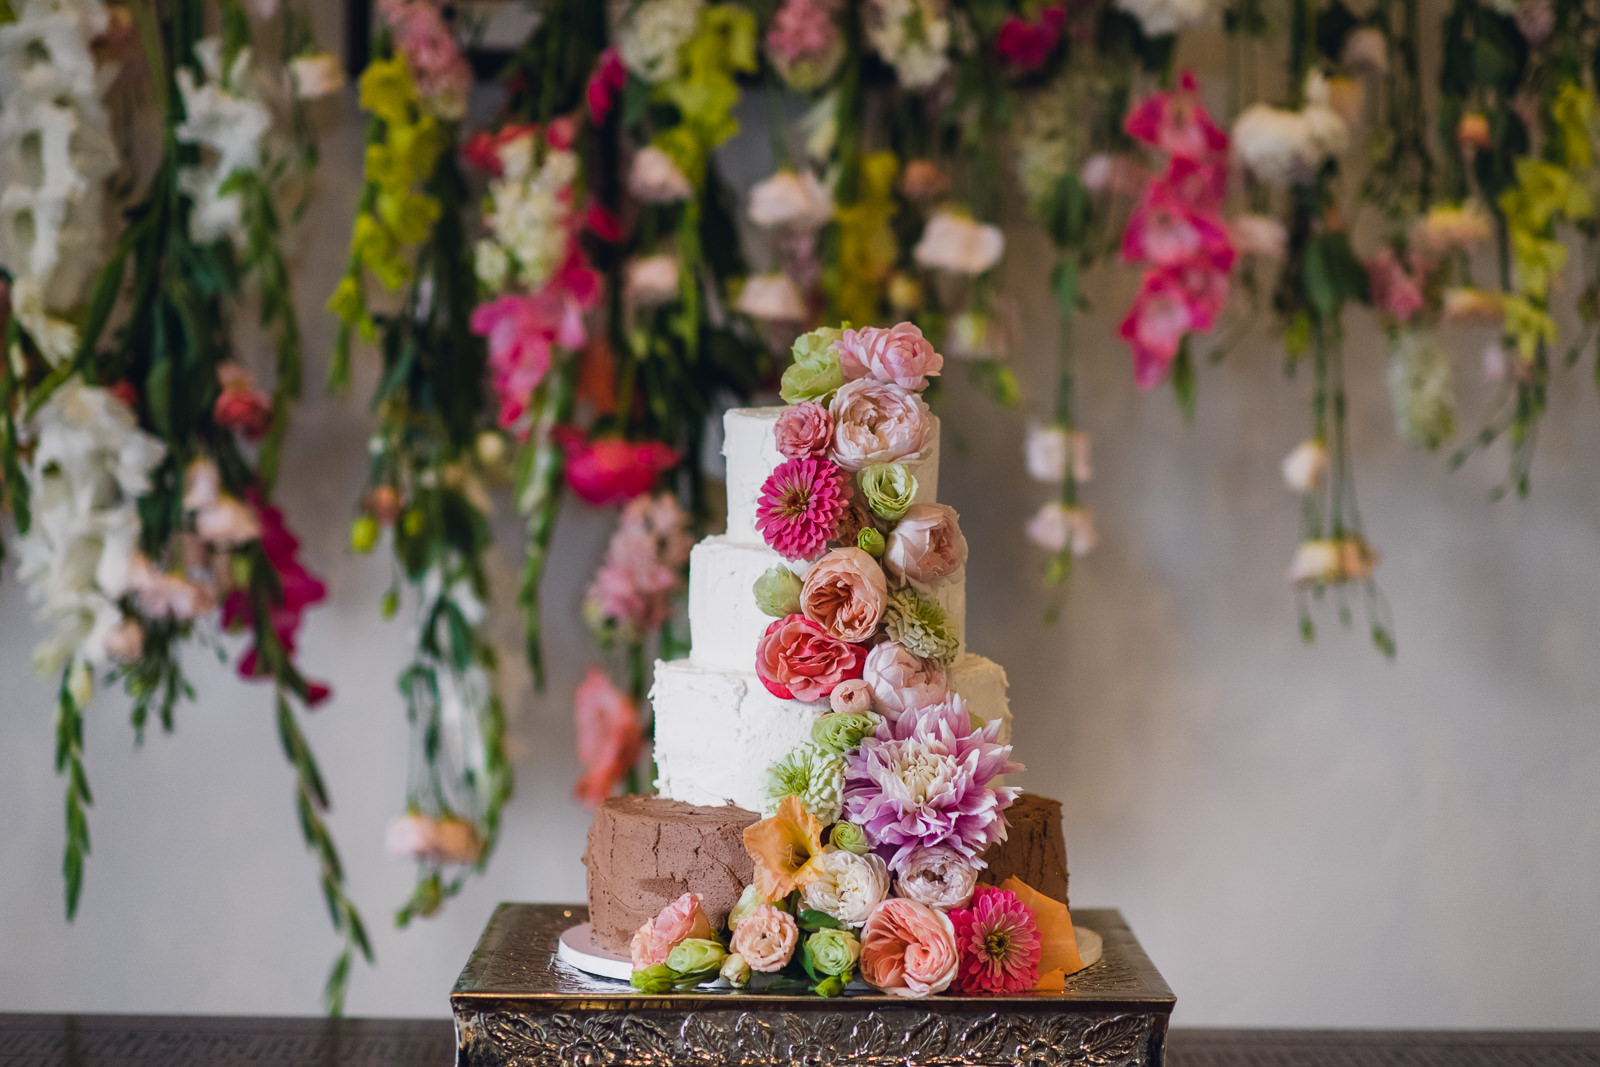 lush citrus flowers decorating wedding cake in front of a dripping floral backdrop